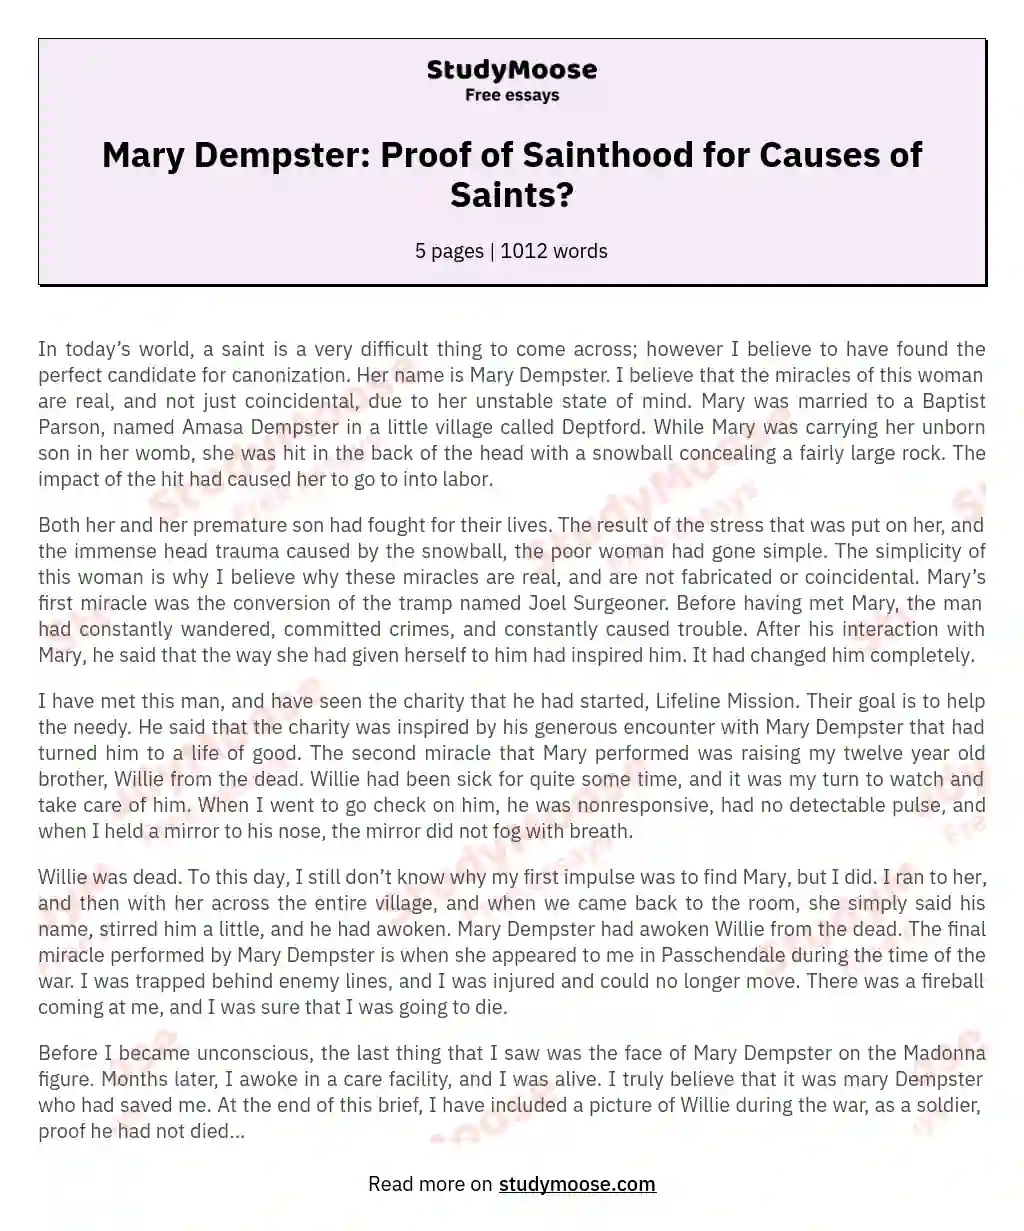 Mary Dempster: Proof of Sainthood for Causes of Saints? essay